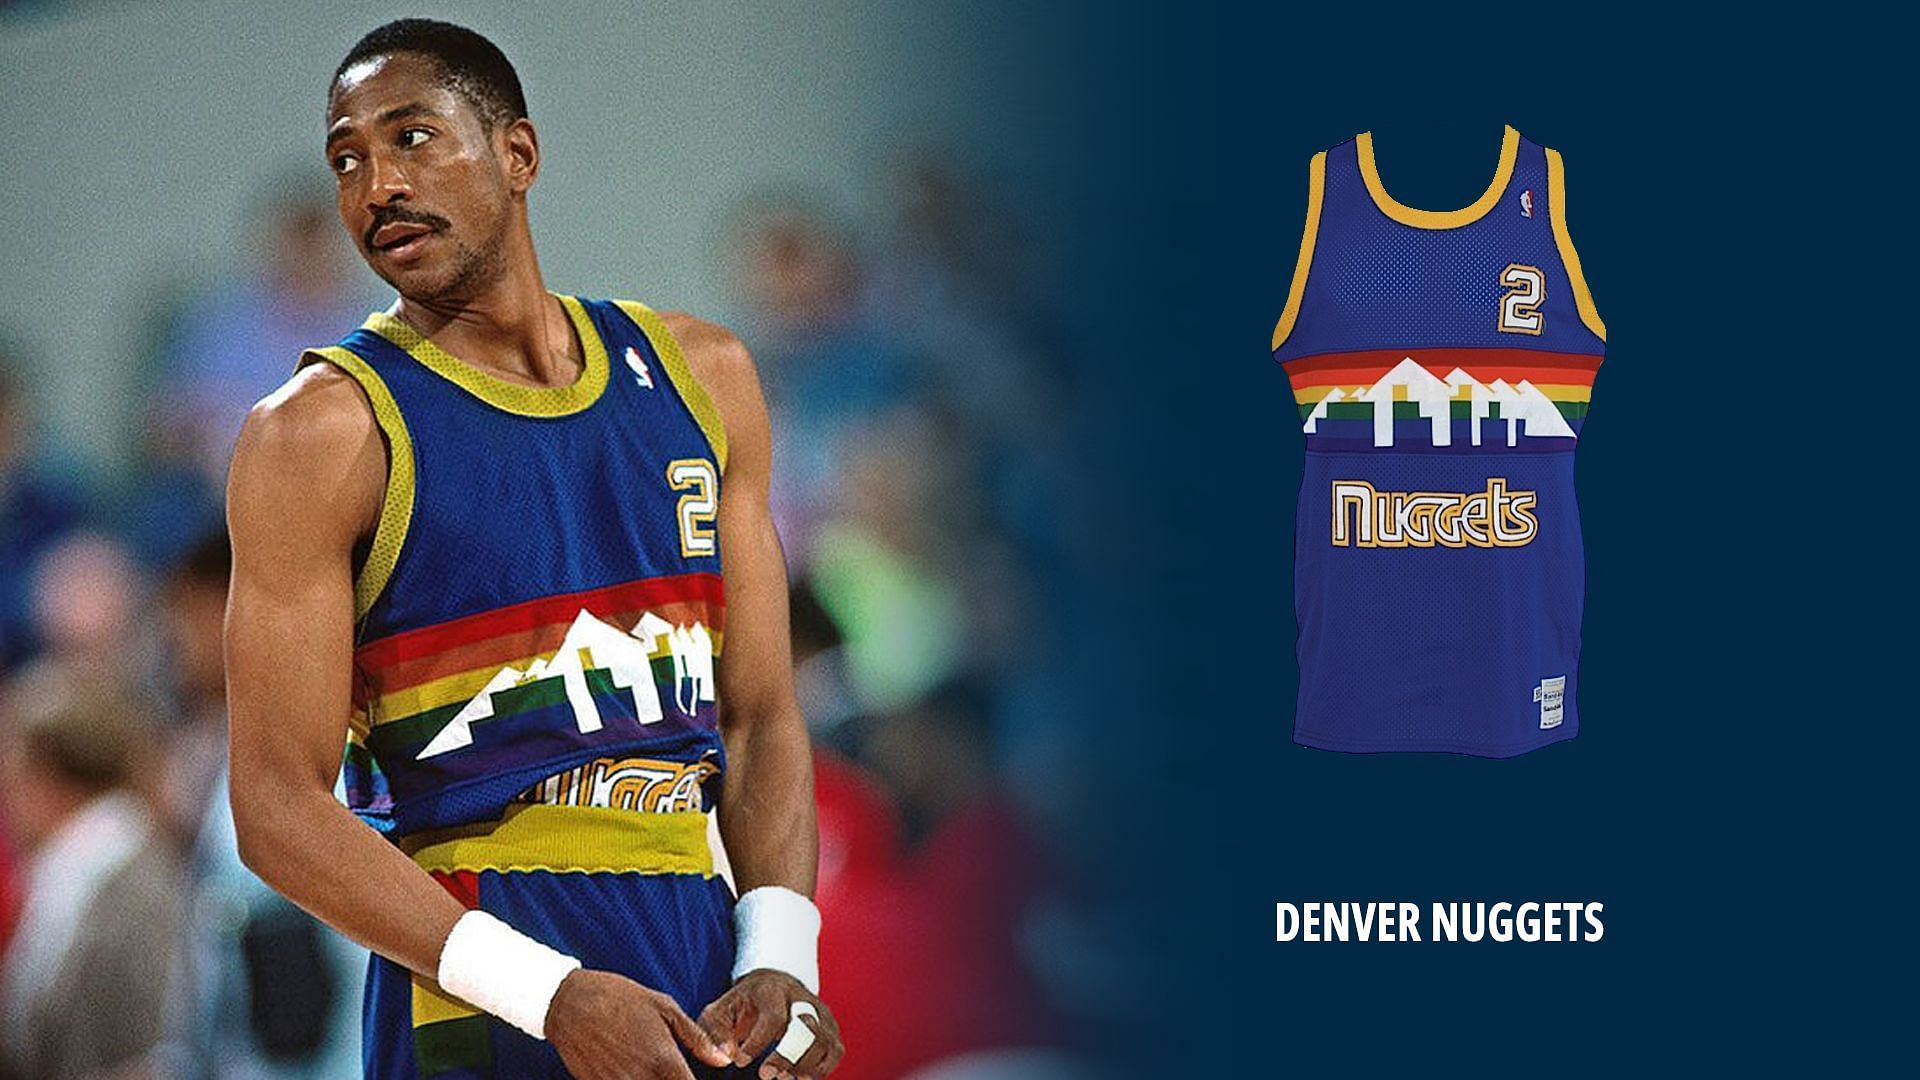 The Nuggets had their most iconic jerseys in the late 1980s